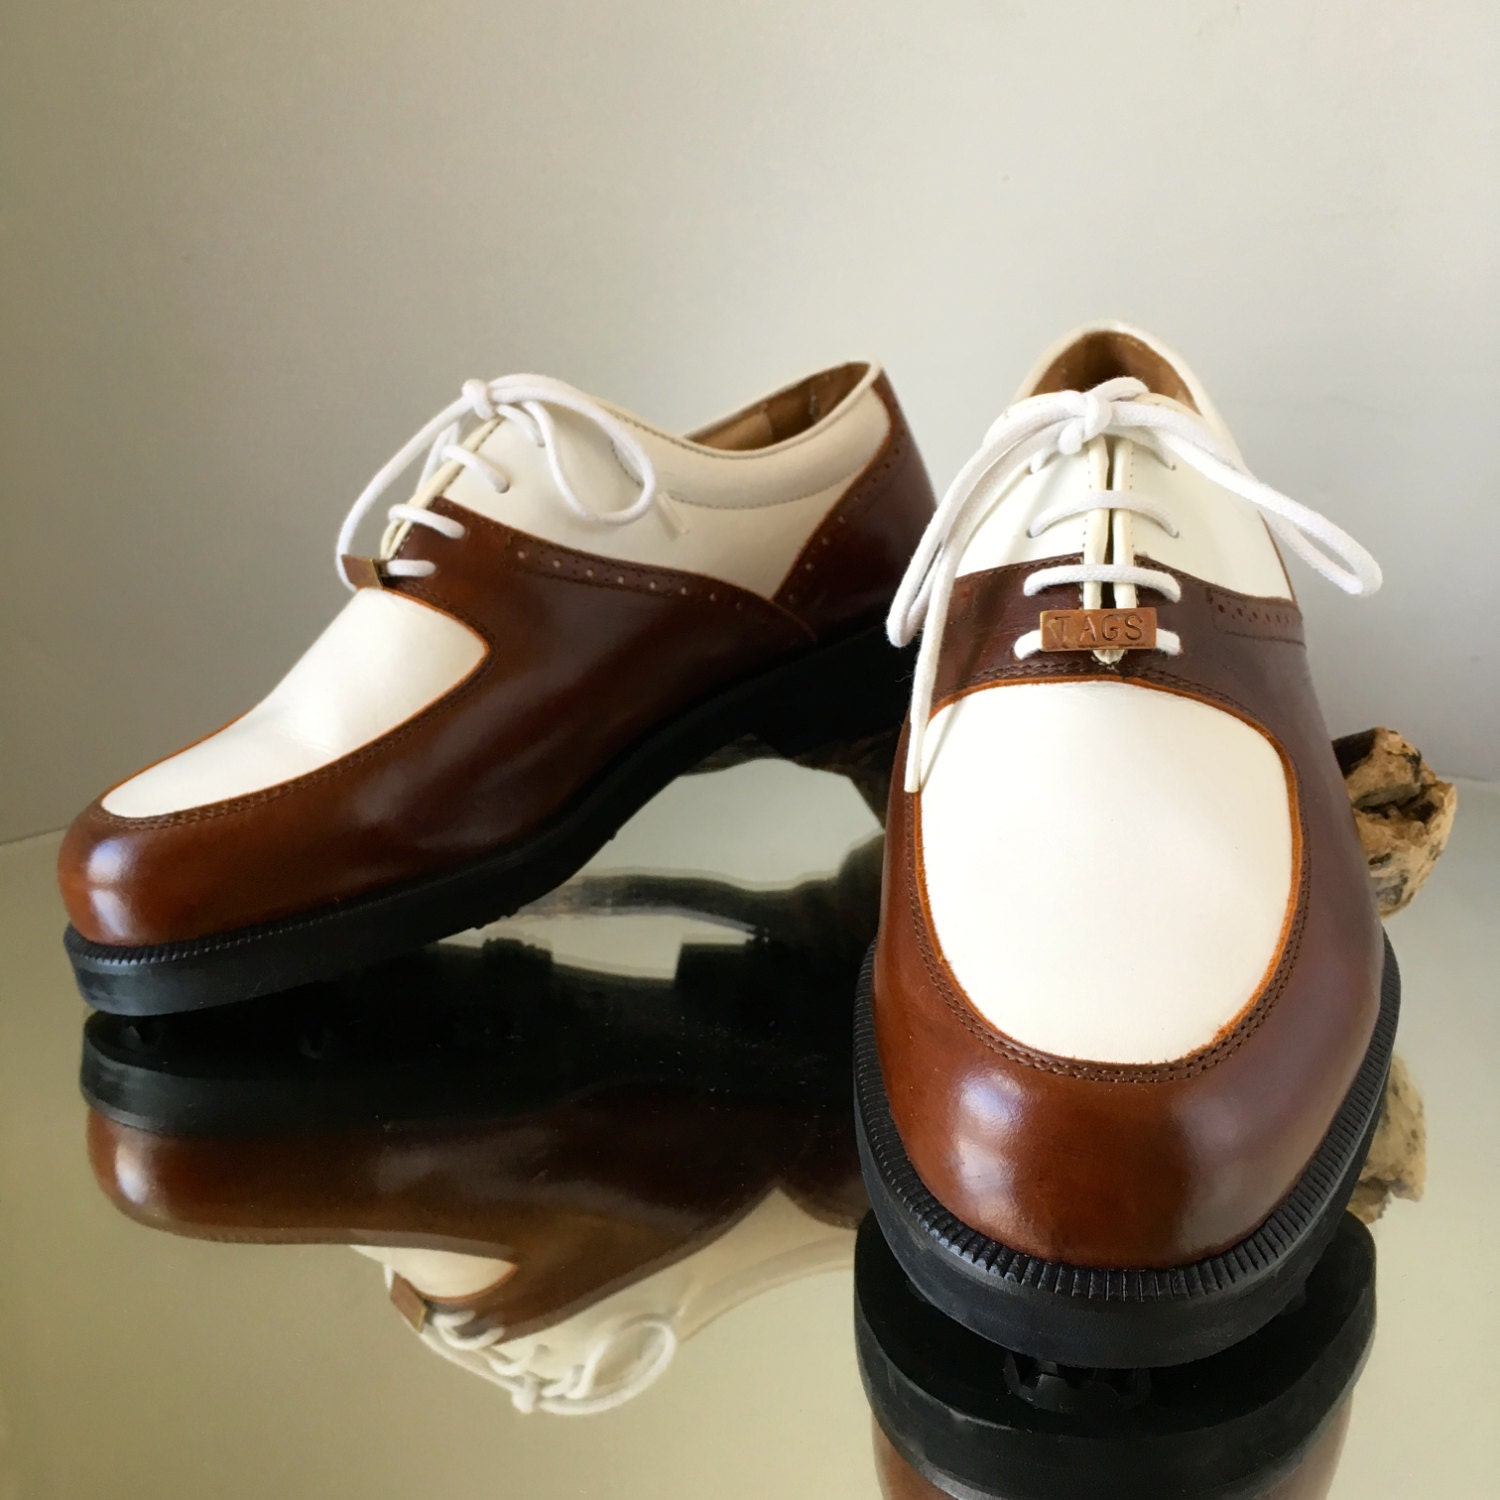 Vintage TAGS Ladies Classic Italian Made Golf Shoes Women